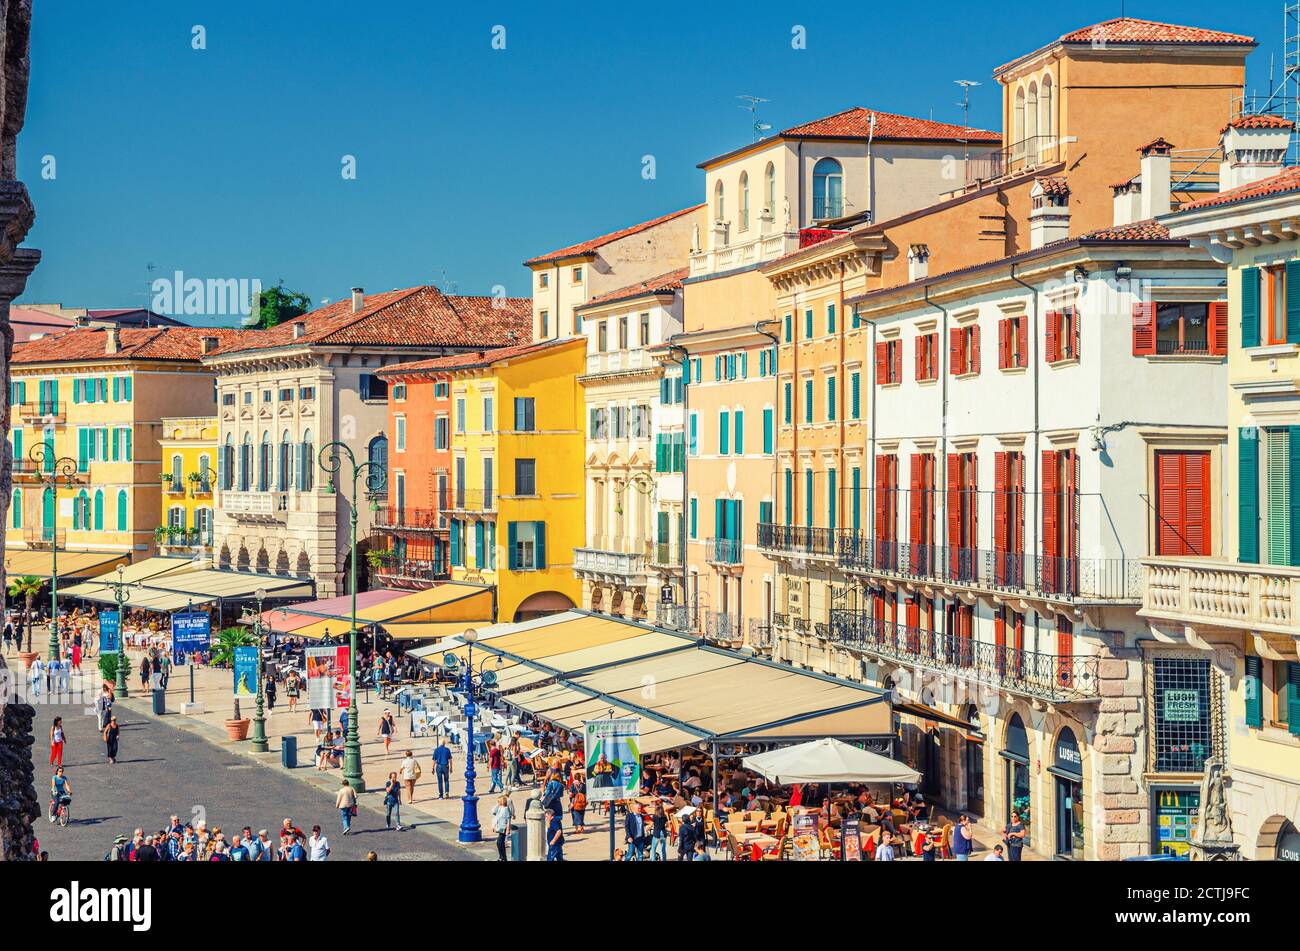 Verona, Italy, September 12, 2019: Row of old colorful multicolored buildings on Piazza Bra square in historical city centre, cafes and restaurants with tents and walking tourists, aerial view Stock Photo